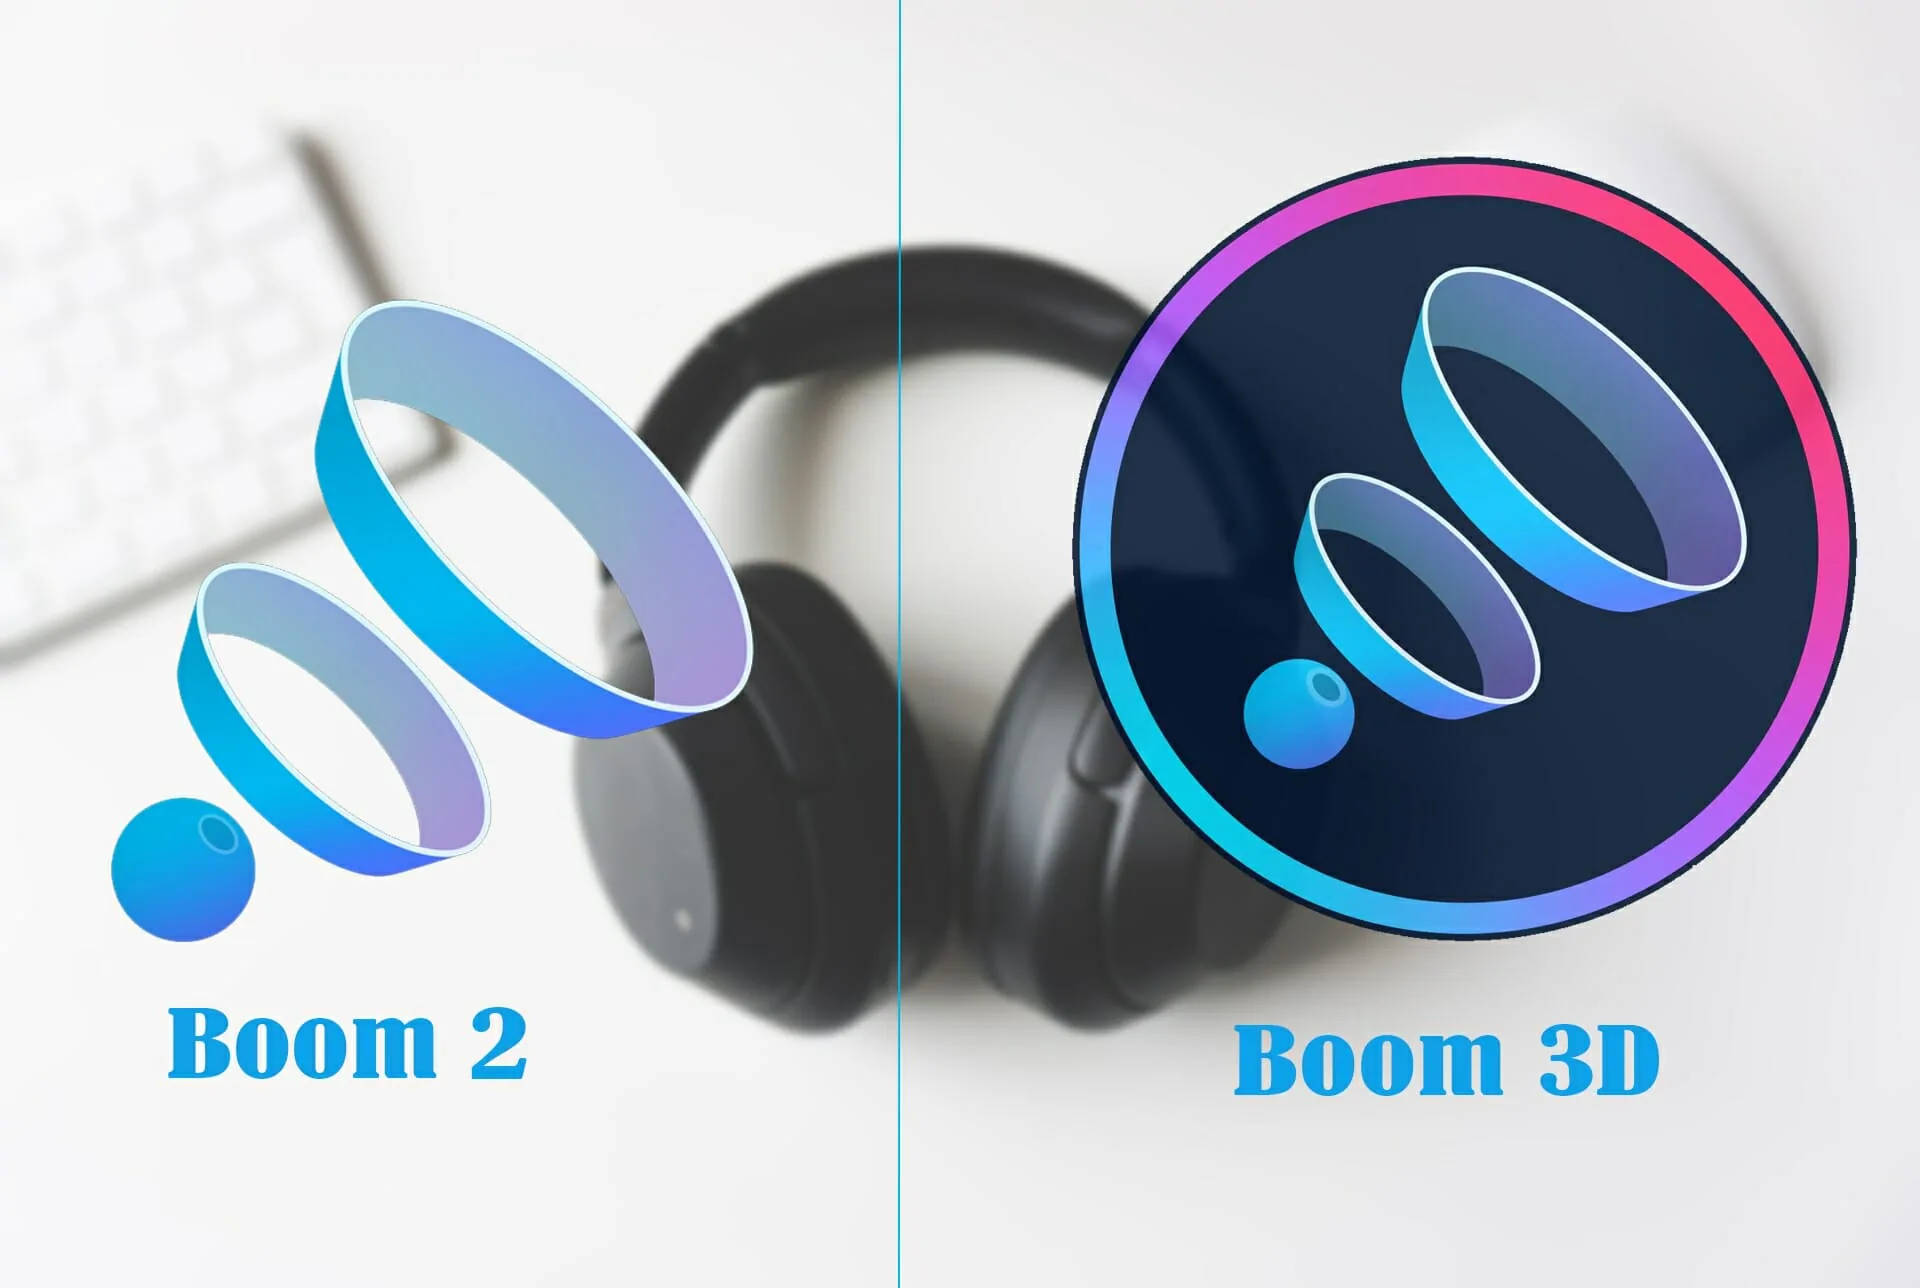 Should you upgrade to Boom 3D